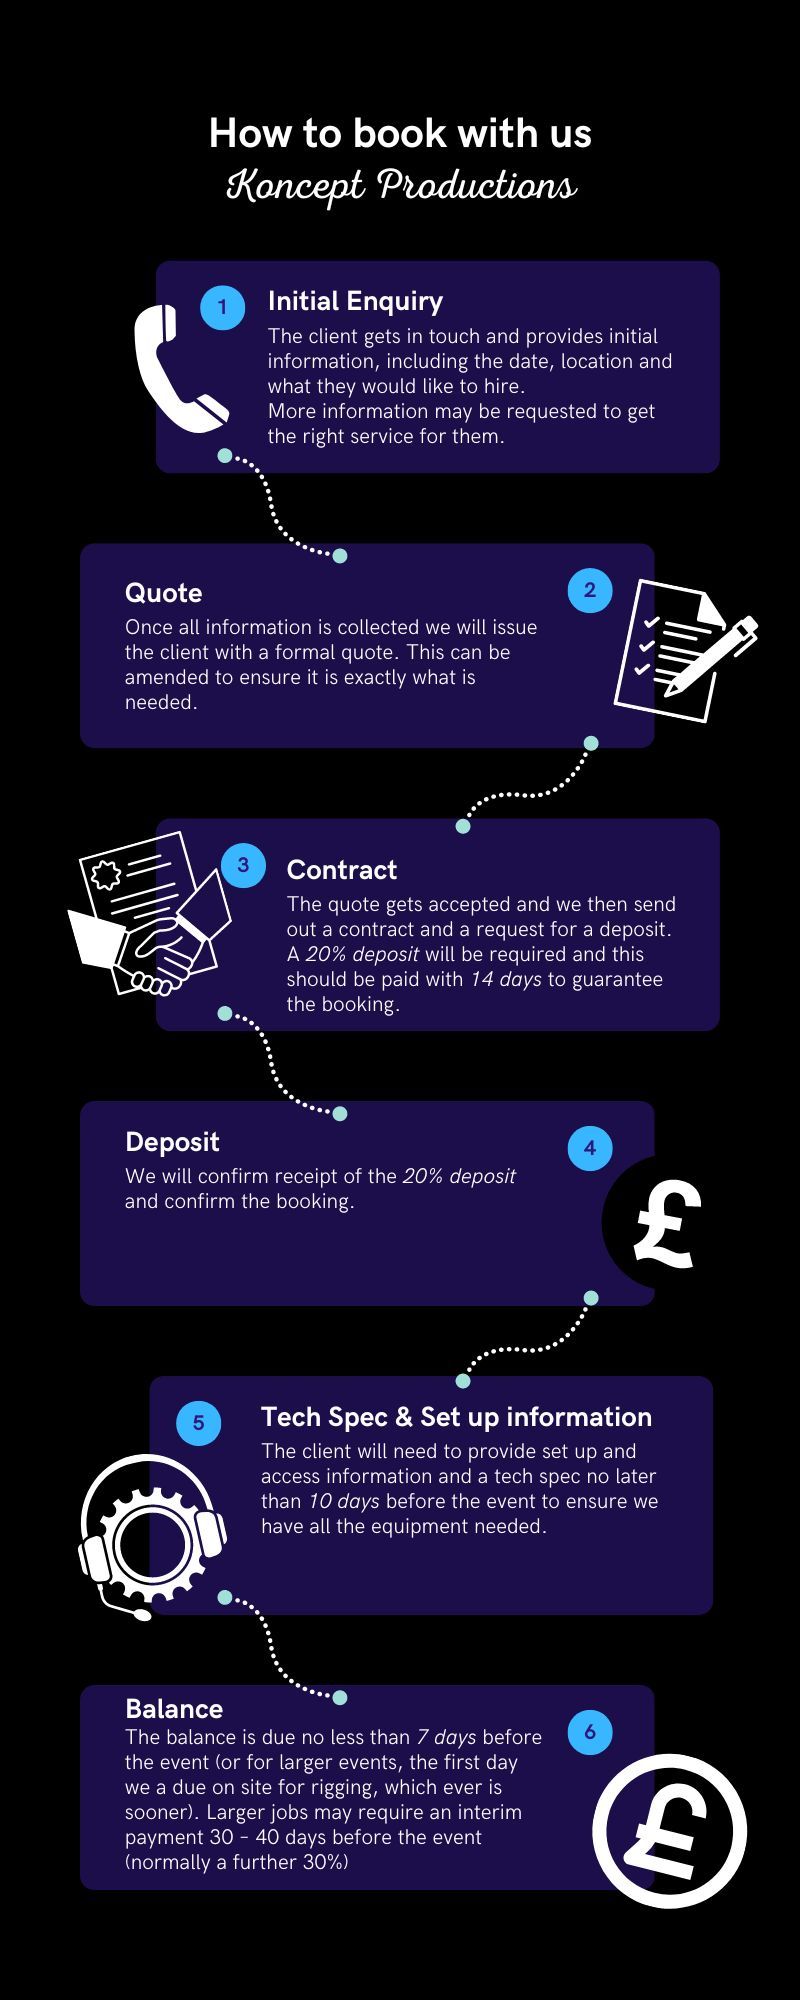 An infographic of the booking process from initial enquiry to paying the balance